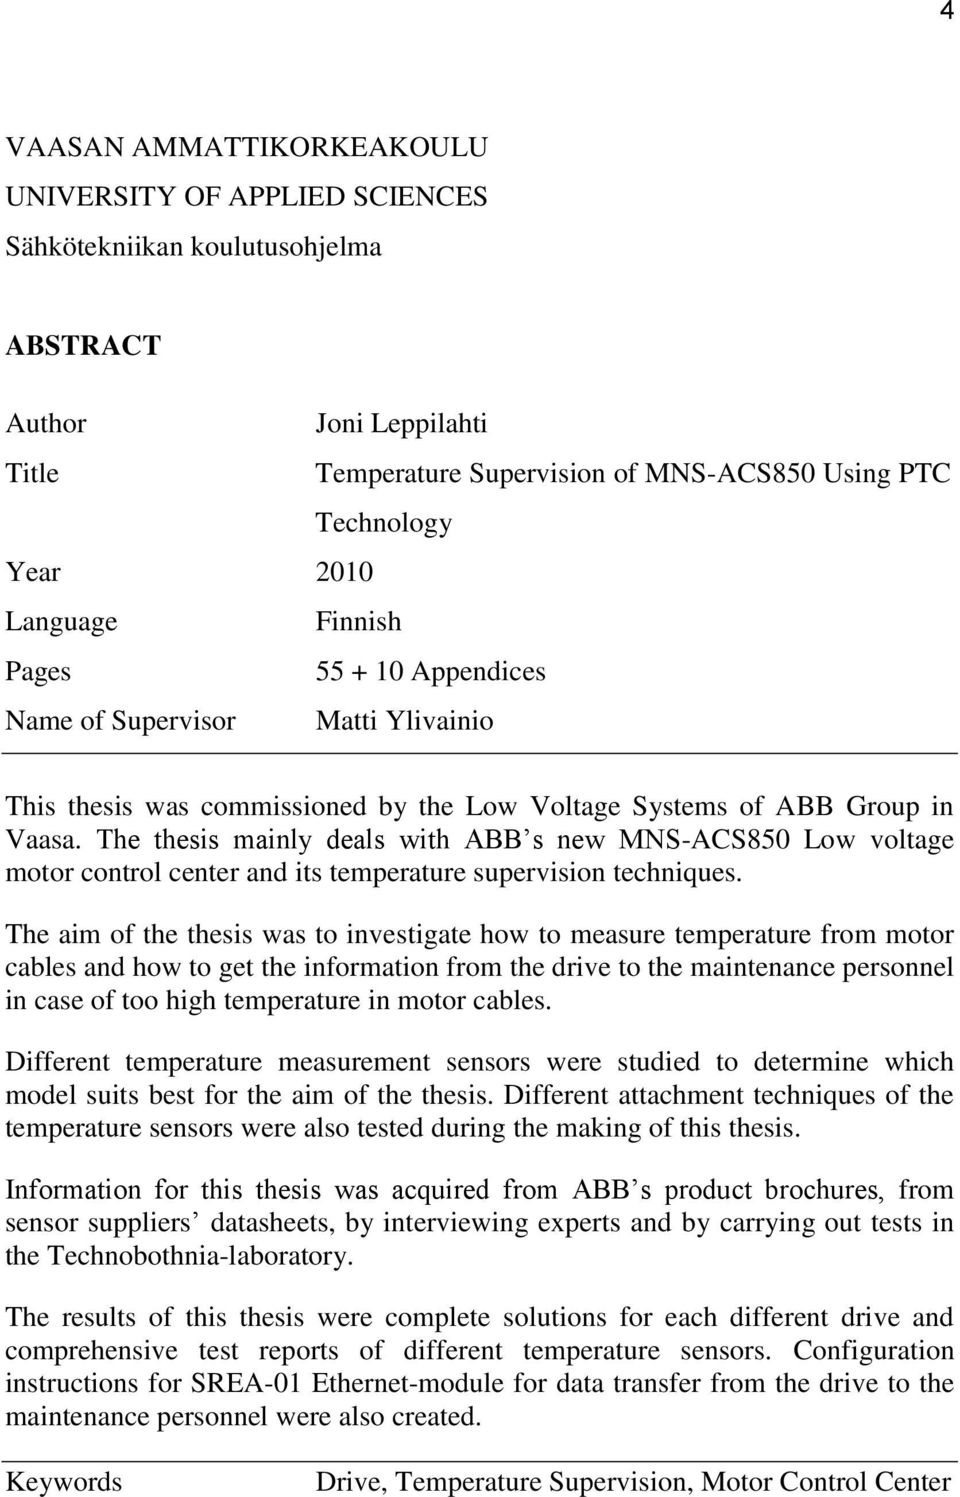 The thesis mainly deals with ABB s new MNS-ACS850 Low voltage motor control center and its temperature supervision techniques.